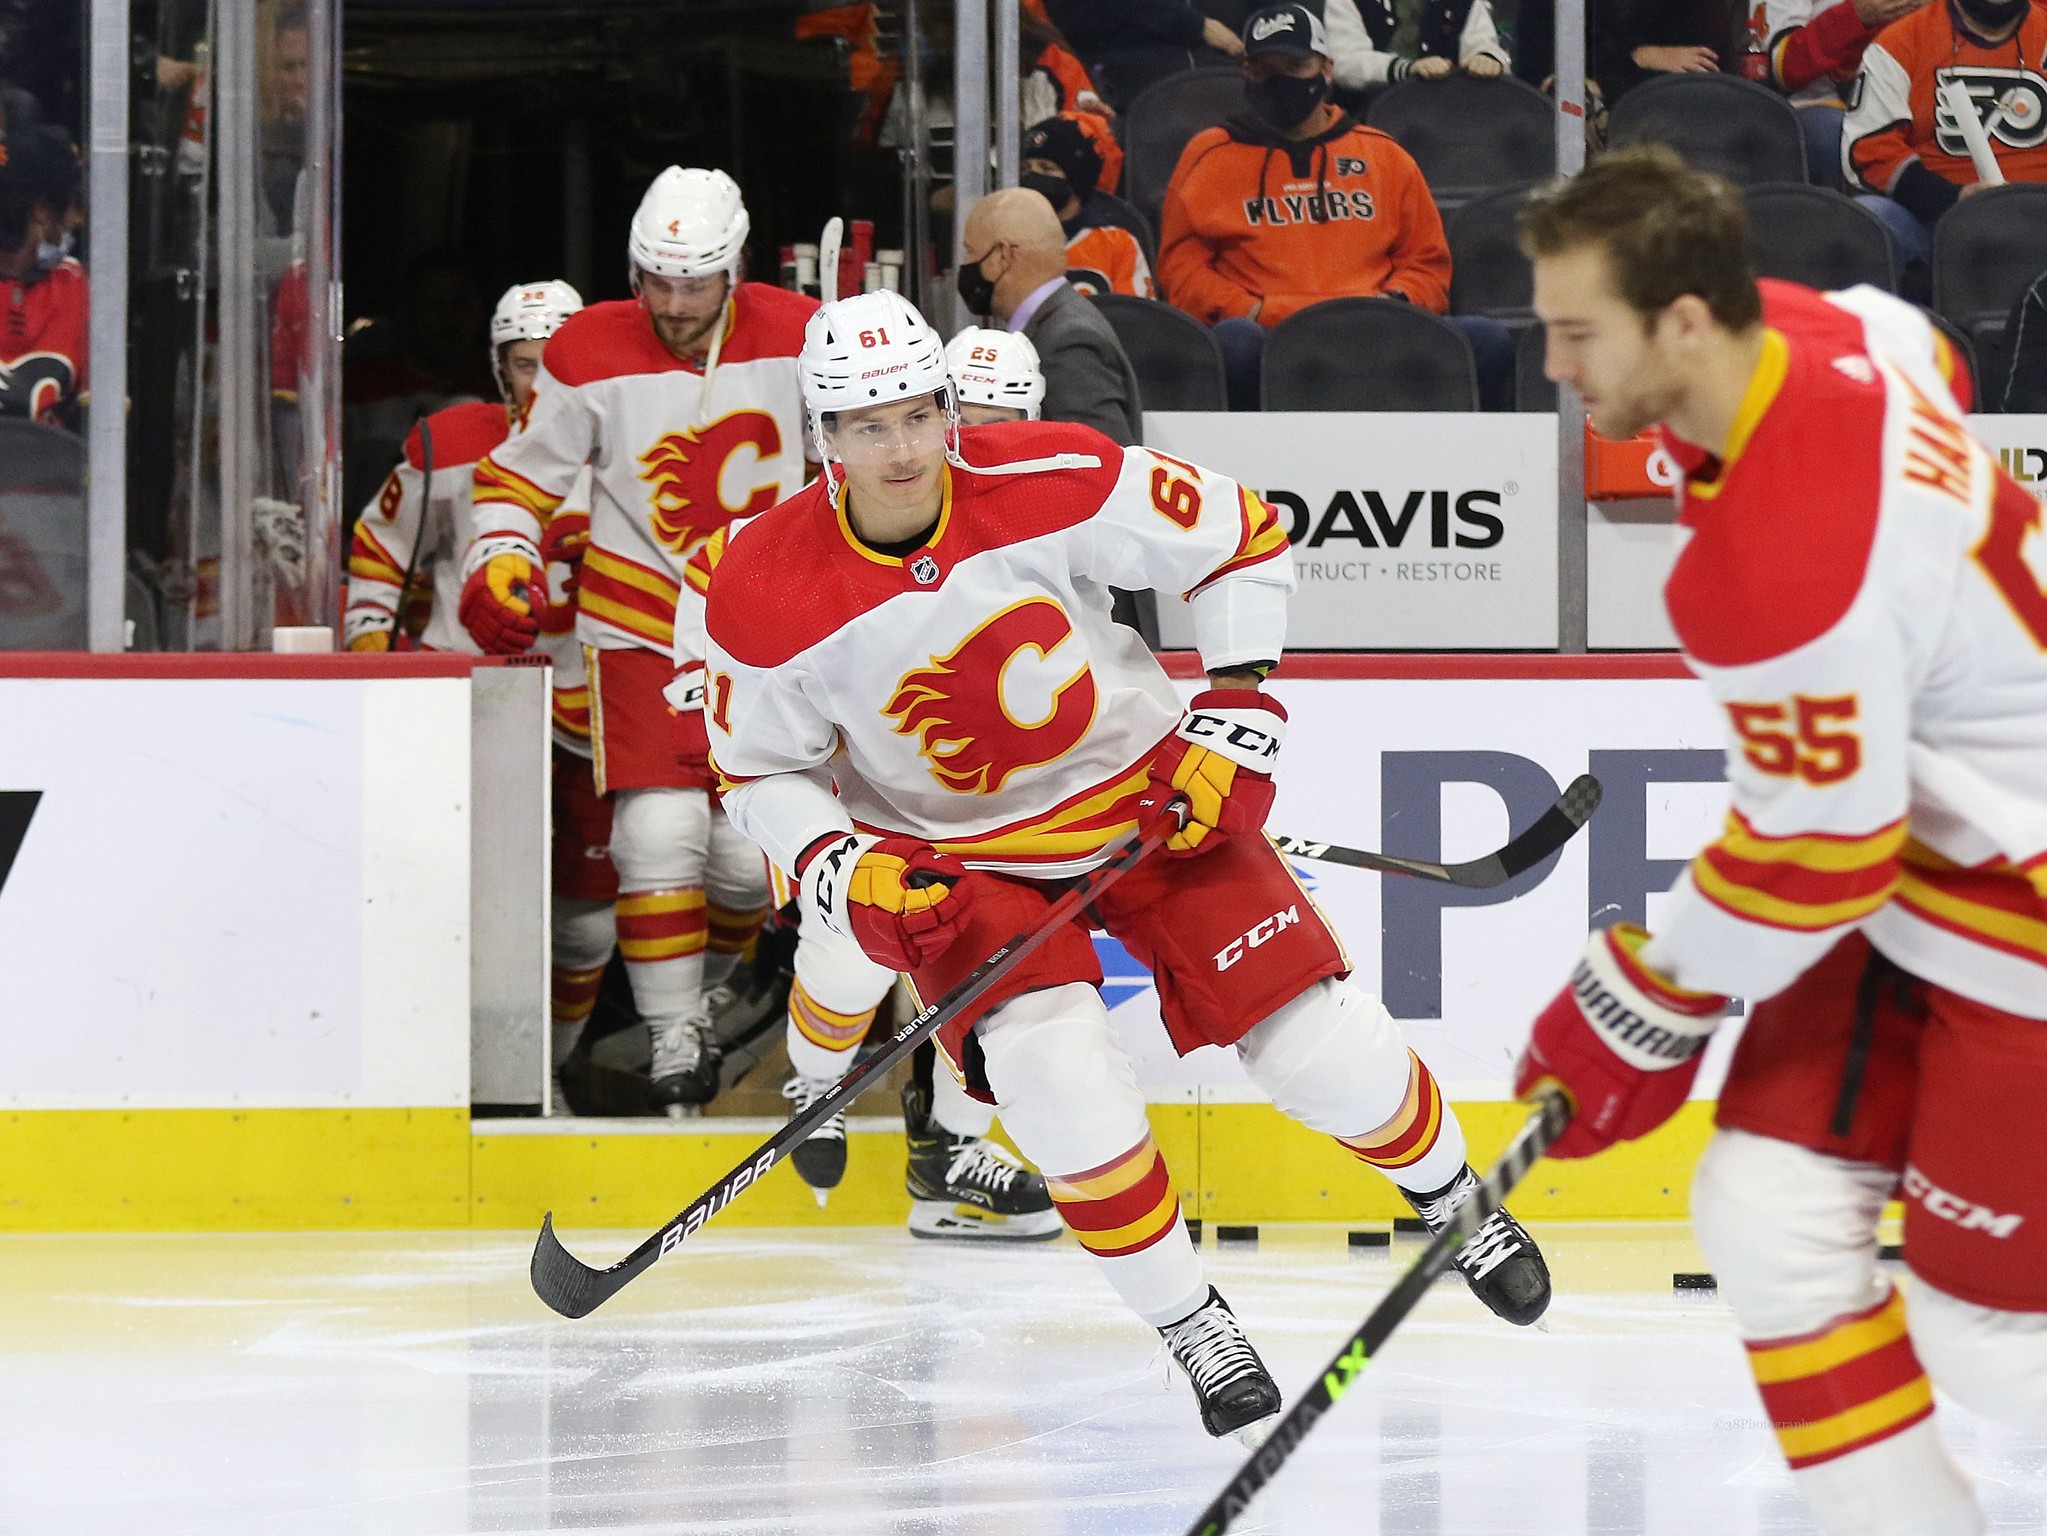 Flames Have Zero Room for Error as They Aim for Playoff Berth